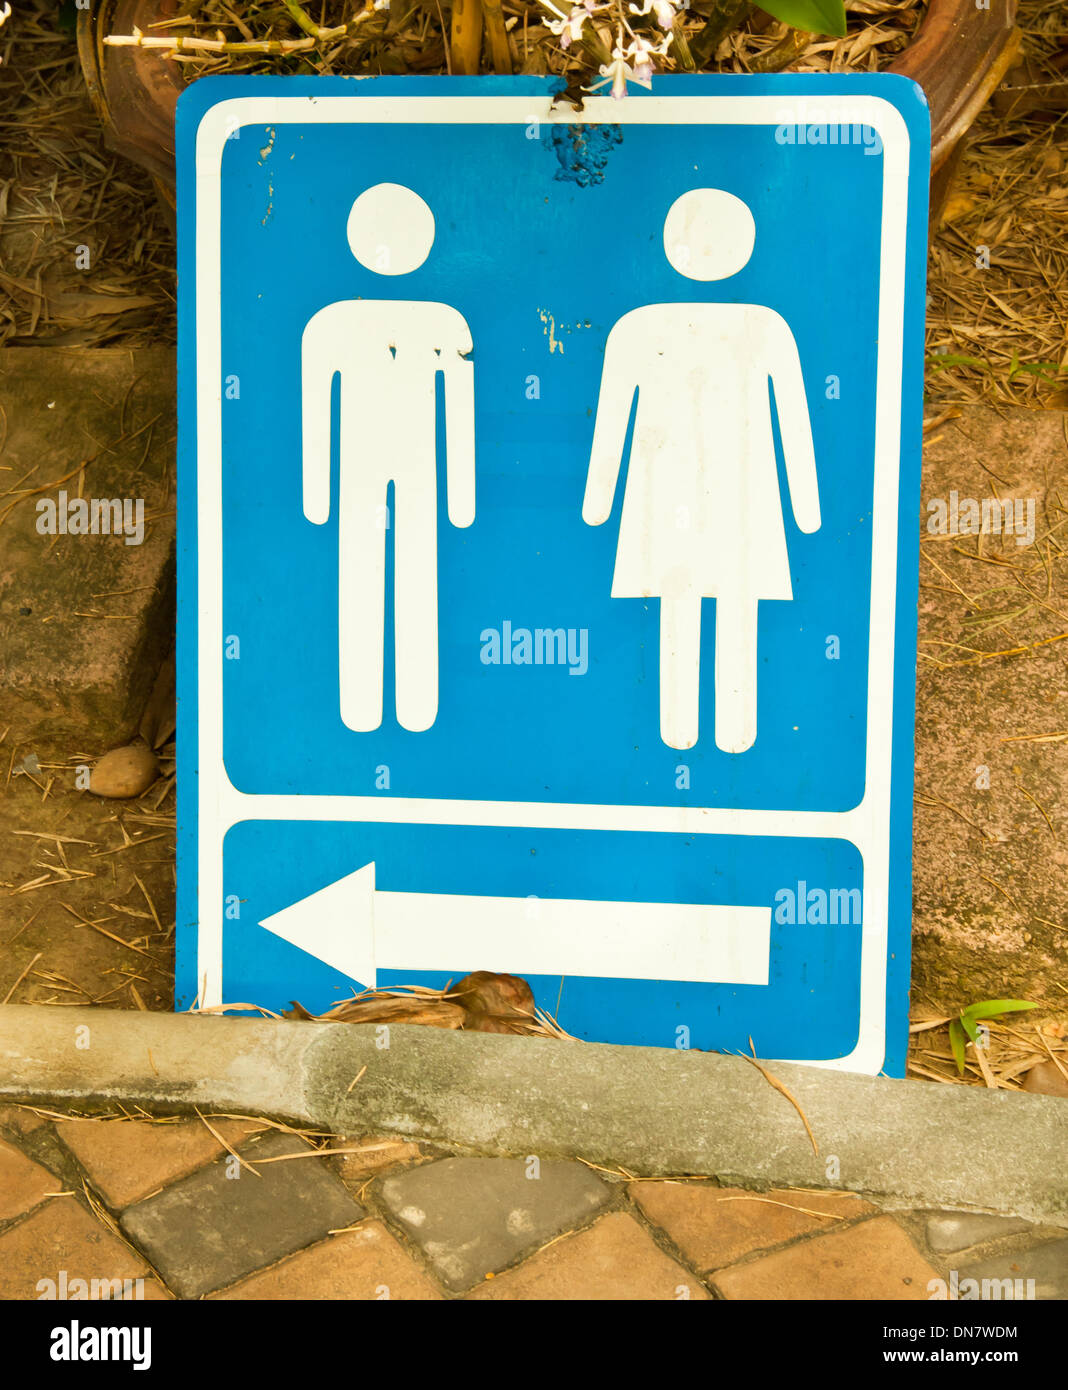 Male and female toilets sign. Placed on the ground near the tree. Stock Photo